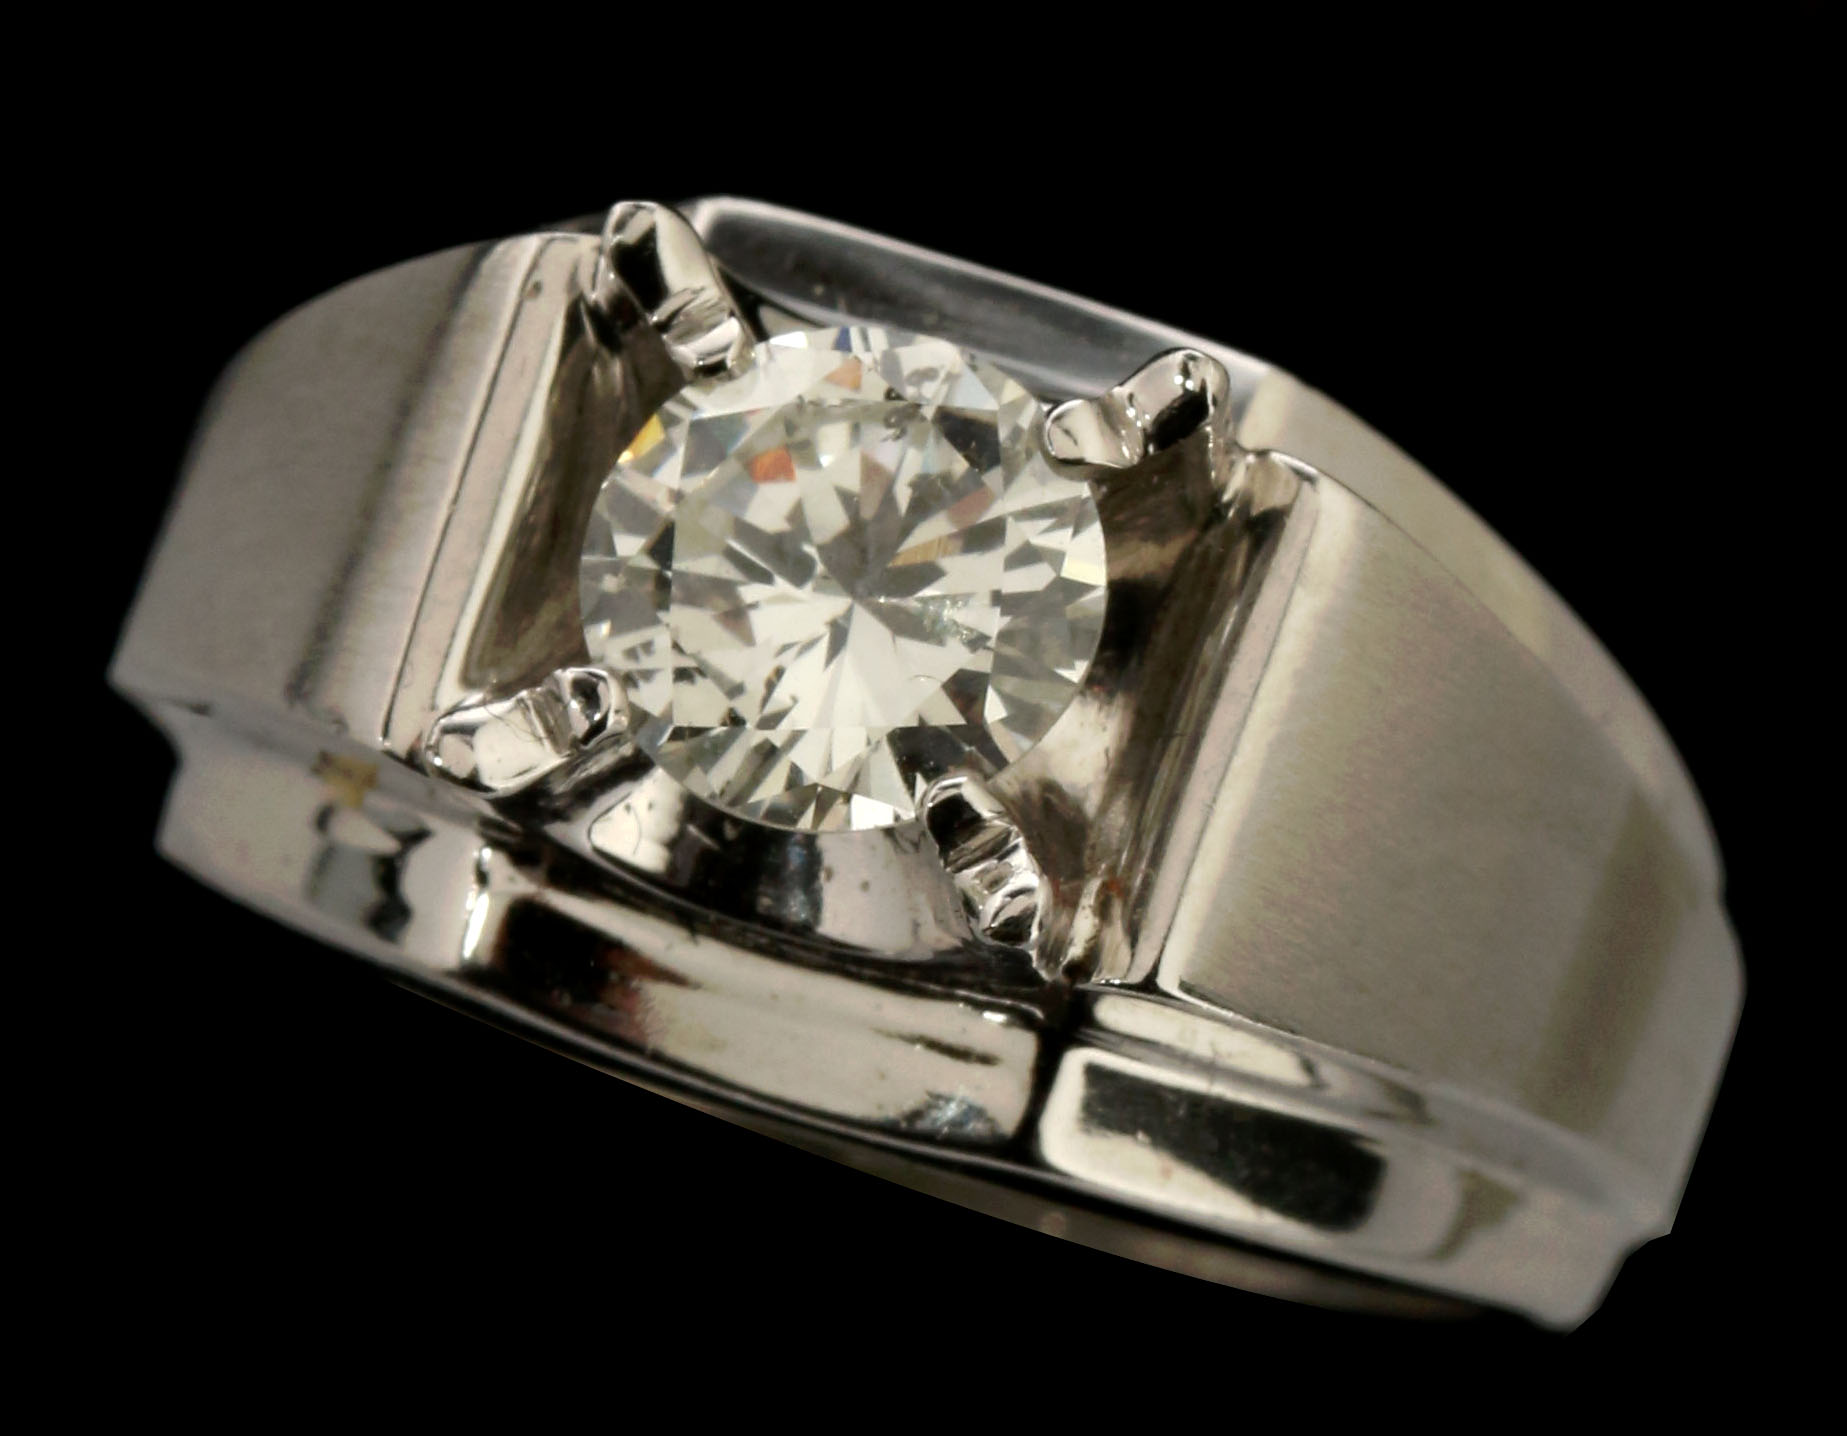 A GENT'S 14K WHITE GOLD BAND WITH 1 CARAT DIAMOND